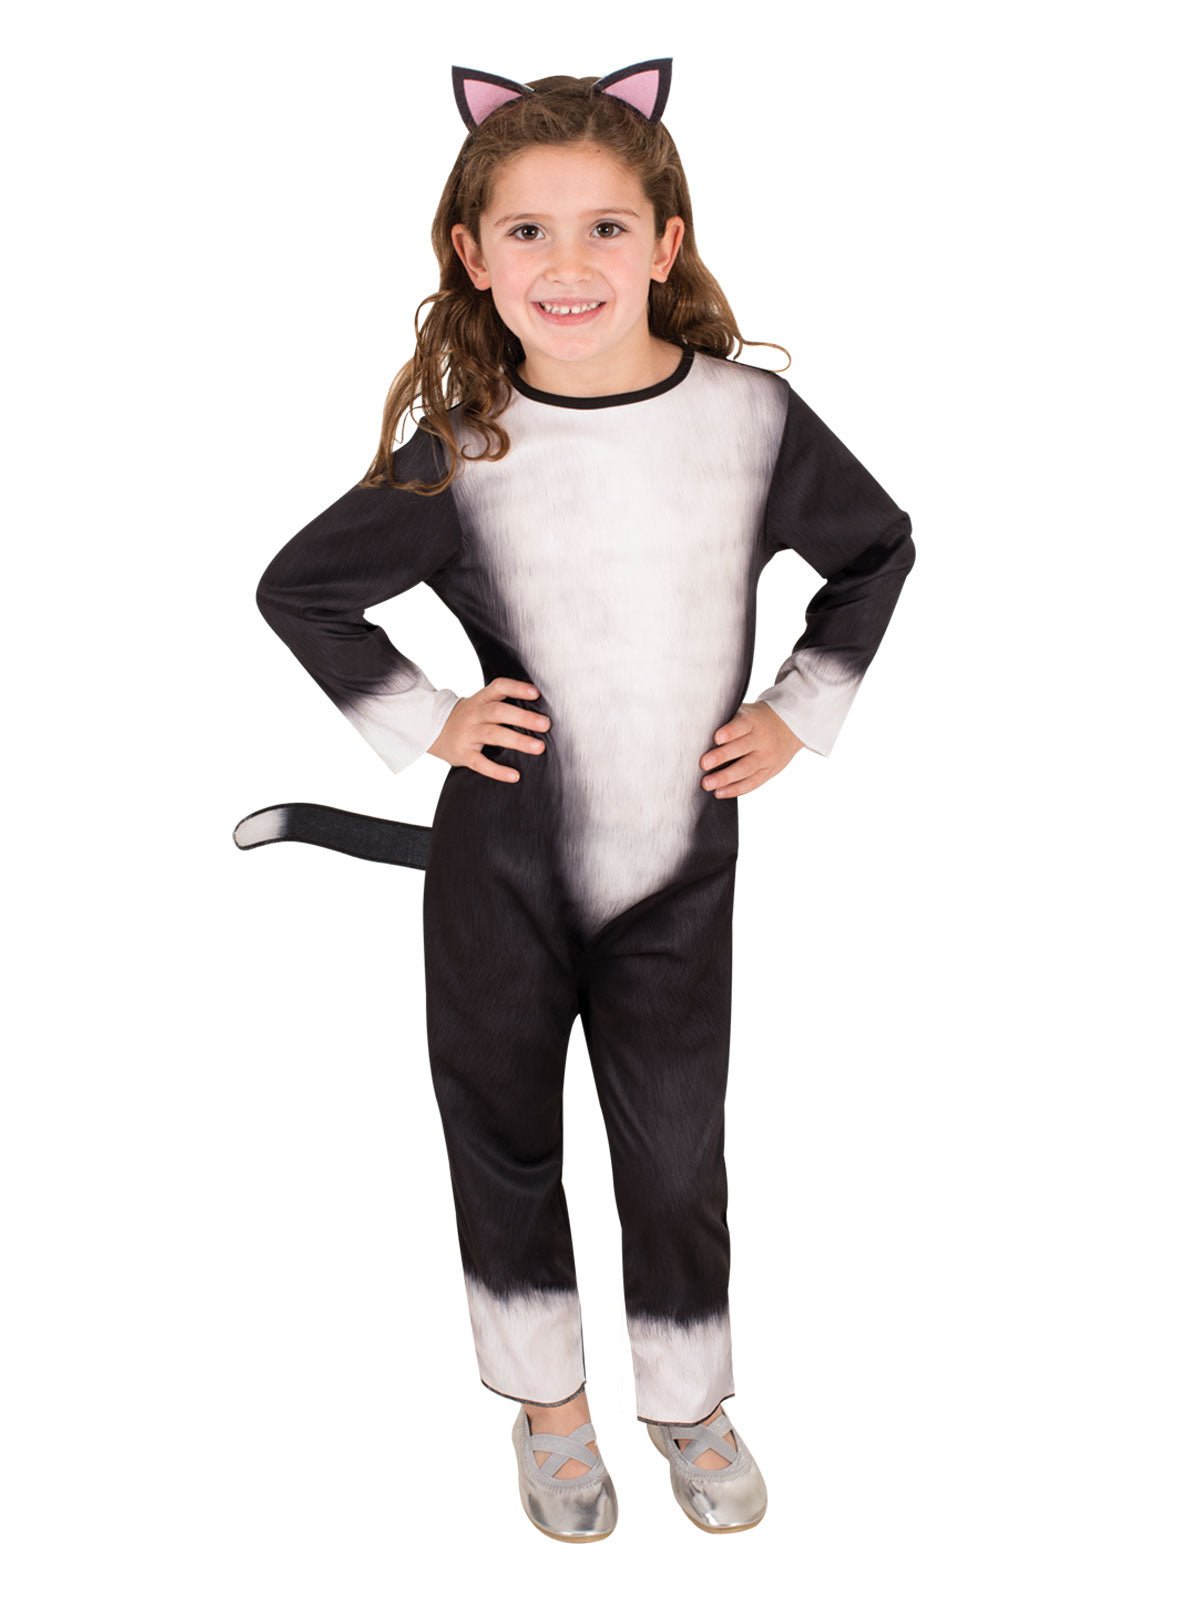 Child wearing Cat Costume with printed fur, tail, and ears, ready for playful adventures